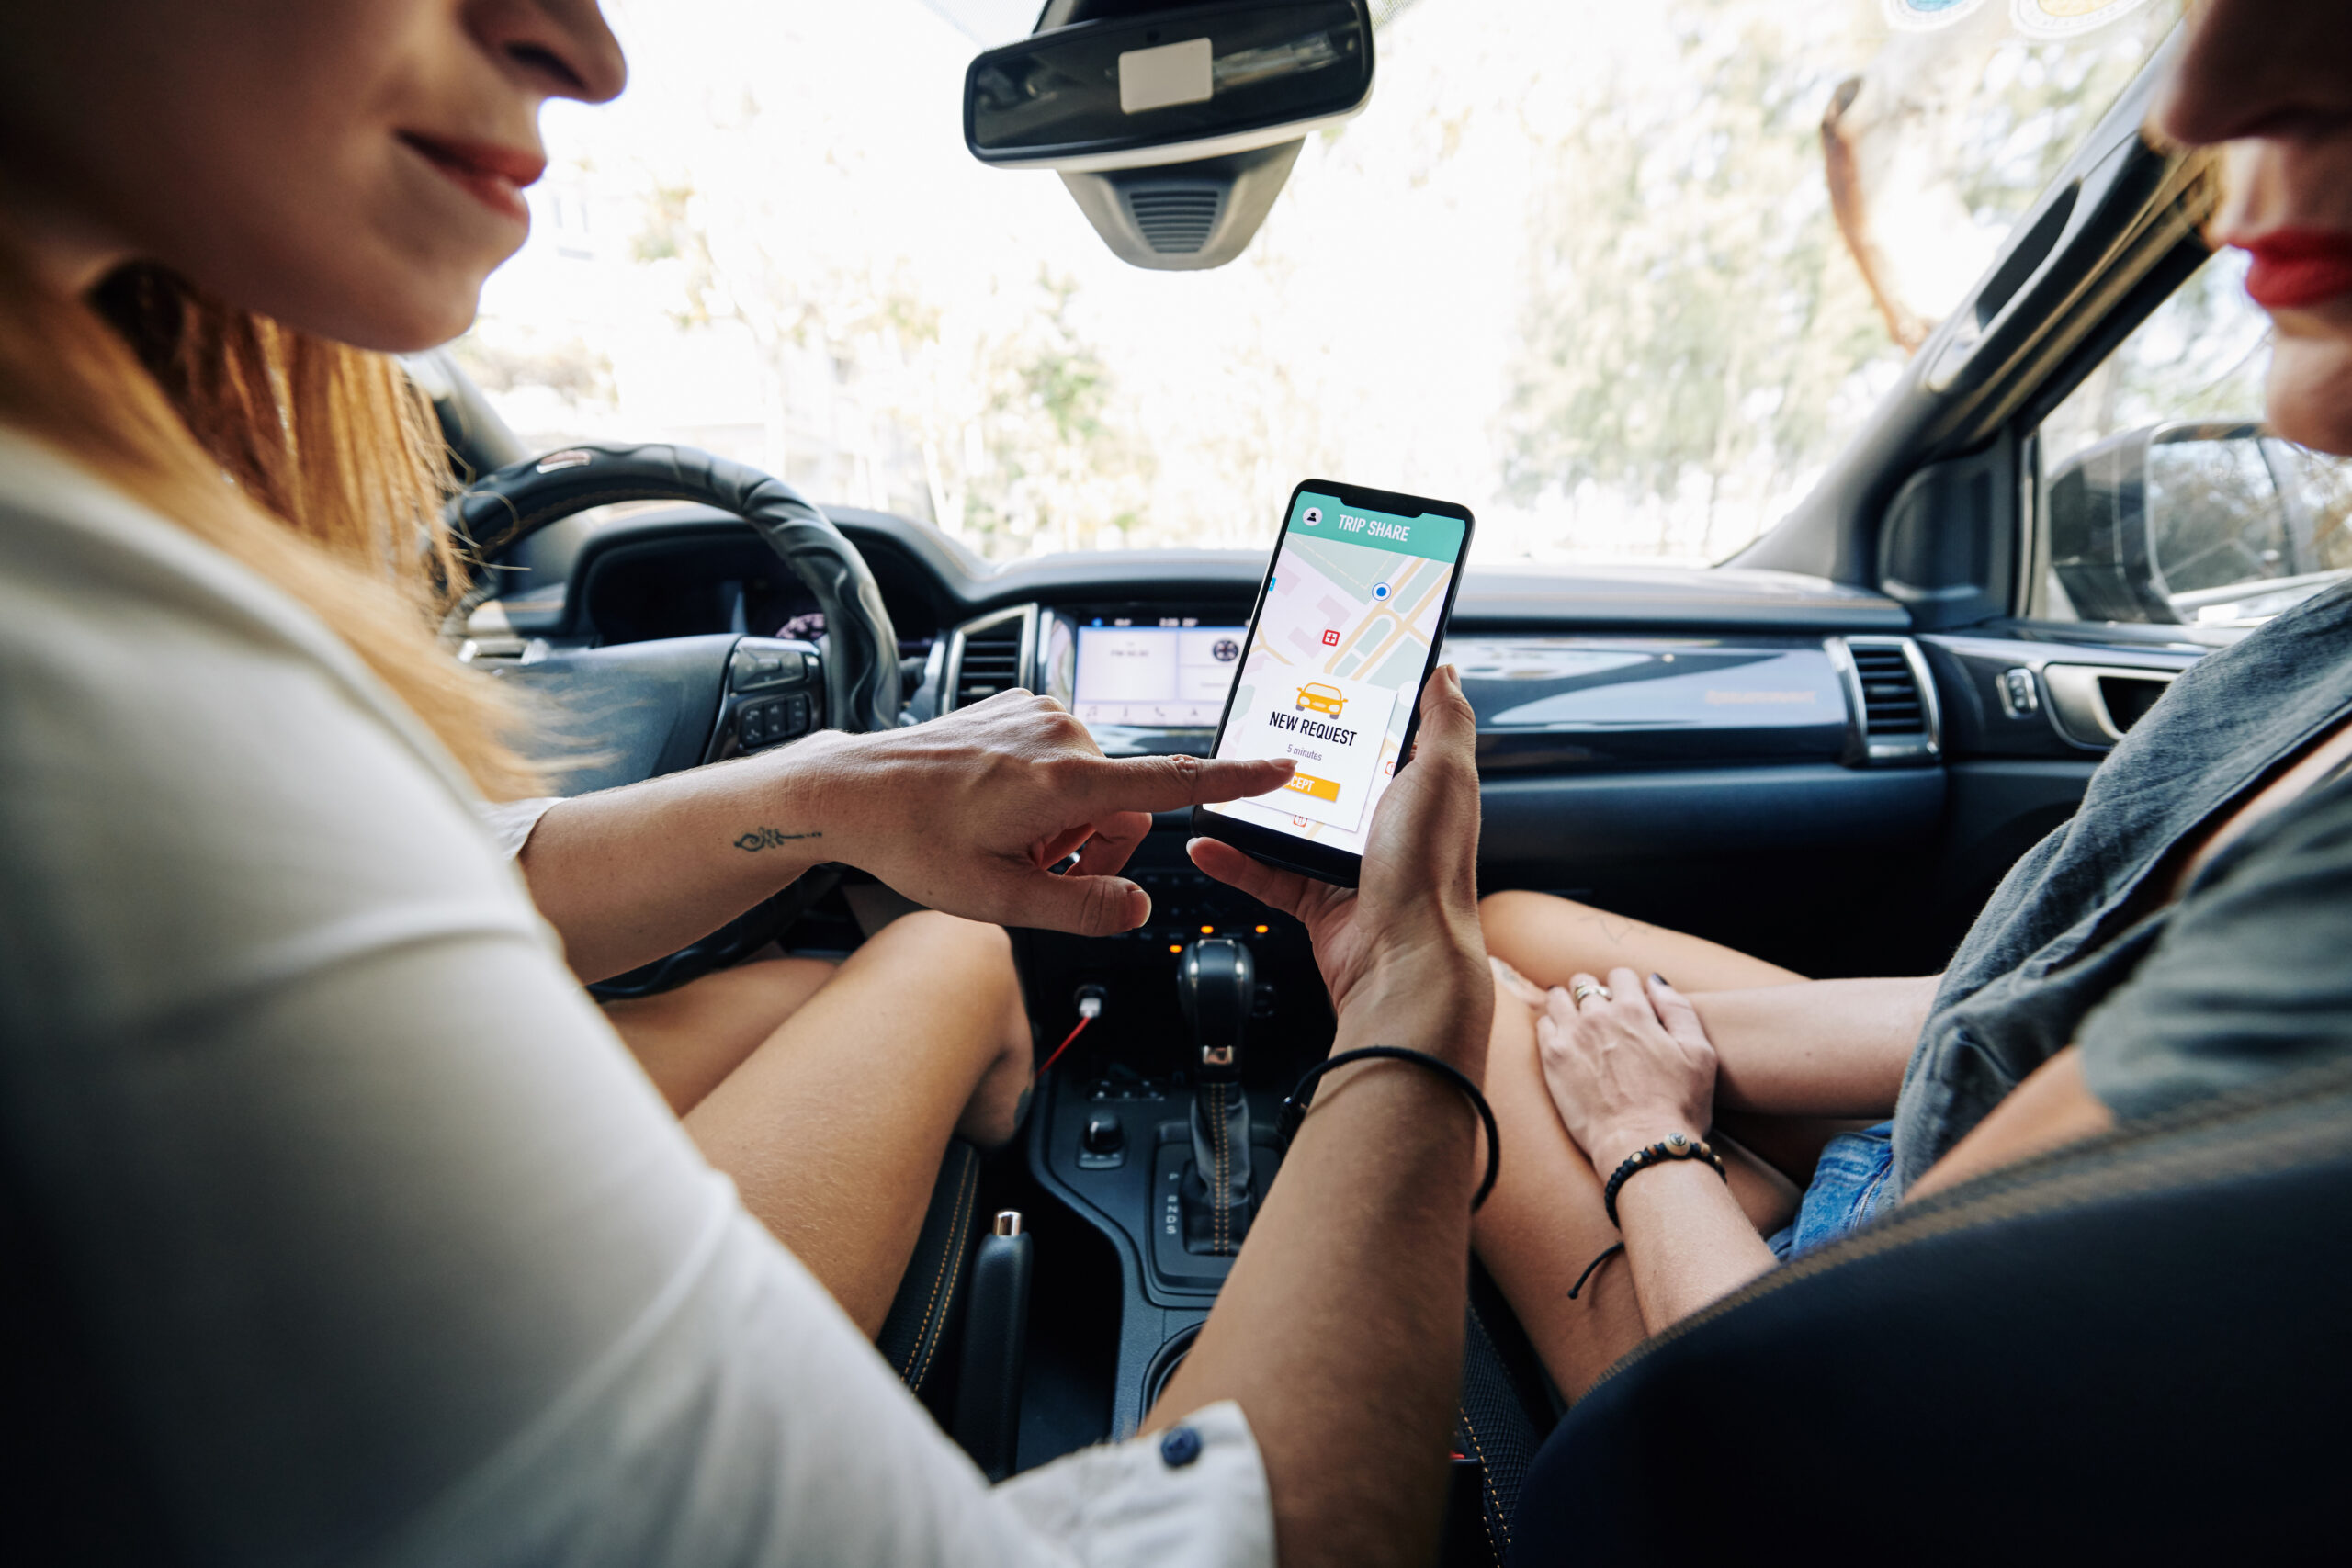 What is Car Sharing? People using an app to rent a vehicle for days, hours, or even minutes.